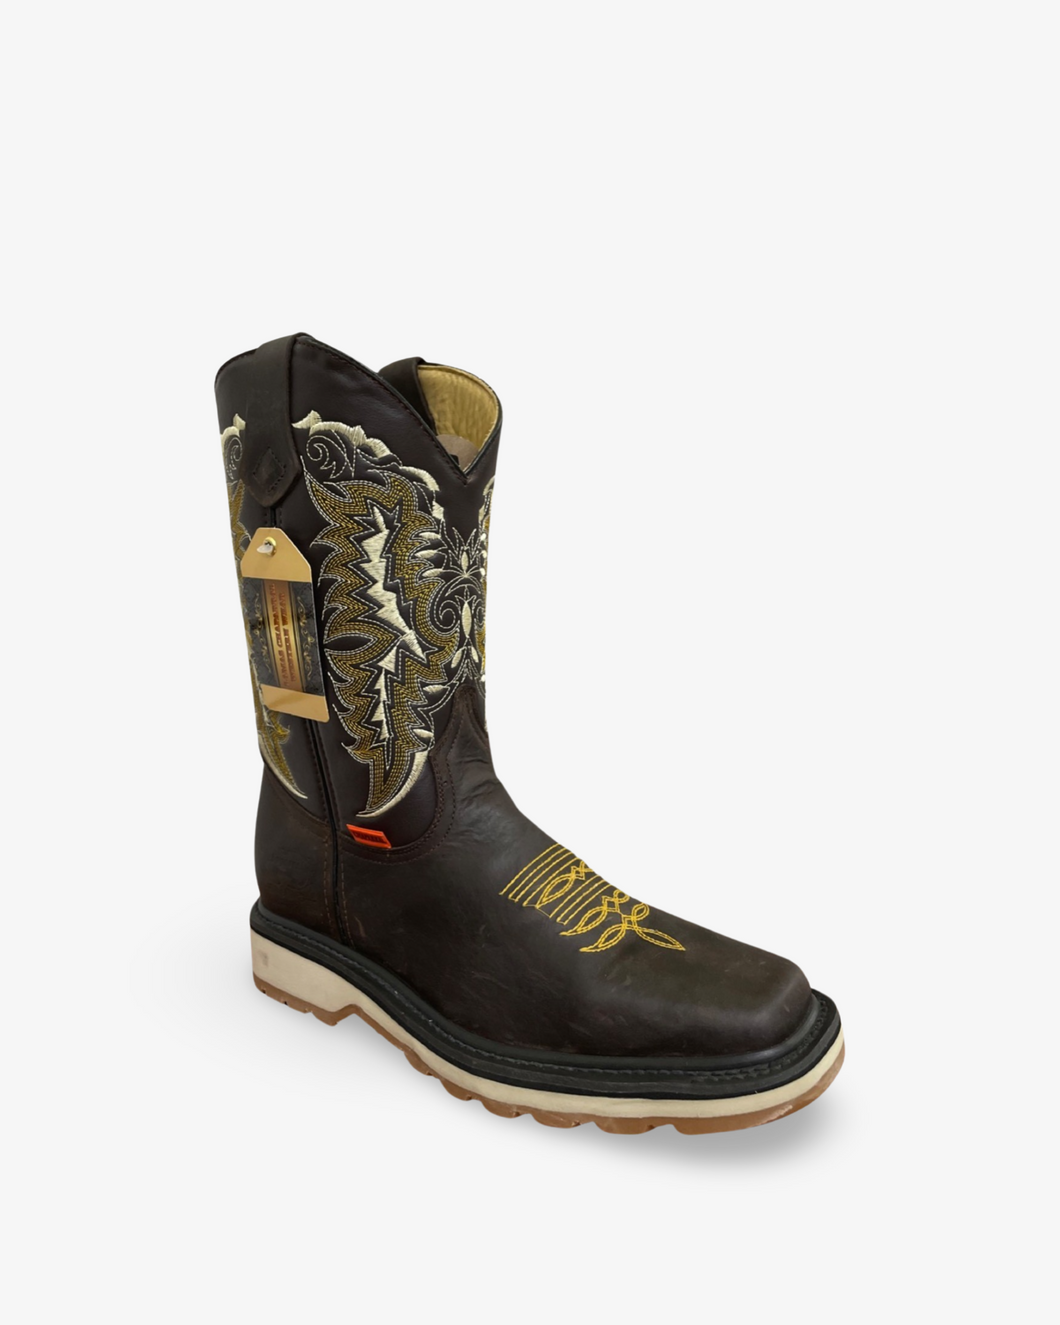 Chaparral 100-Rodeo Black Boot